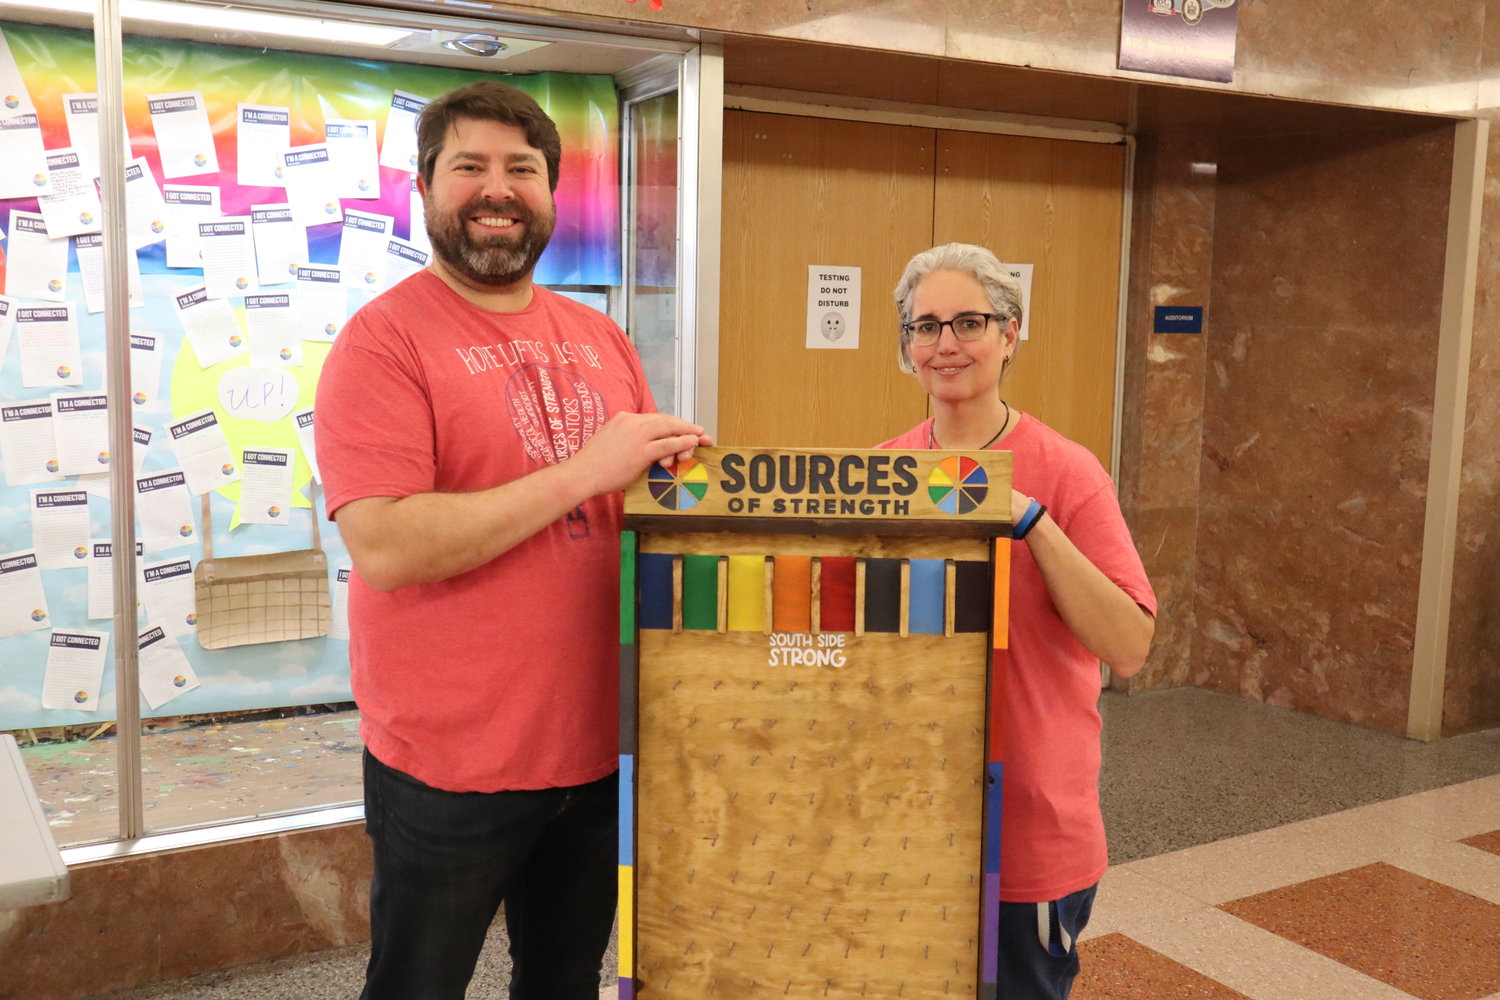 South Side High psychologist Gordon Wood and social worker Nicole Knorr showcased a ‘plinko’-style game that encouraged students to share their Sources of Strength.